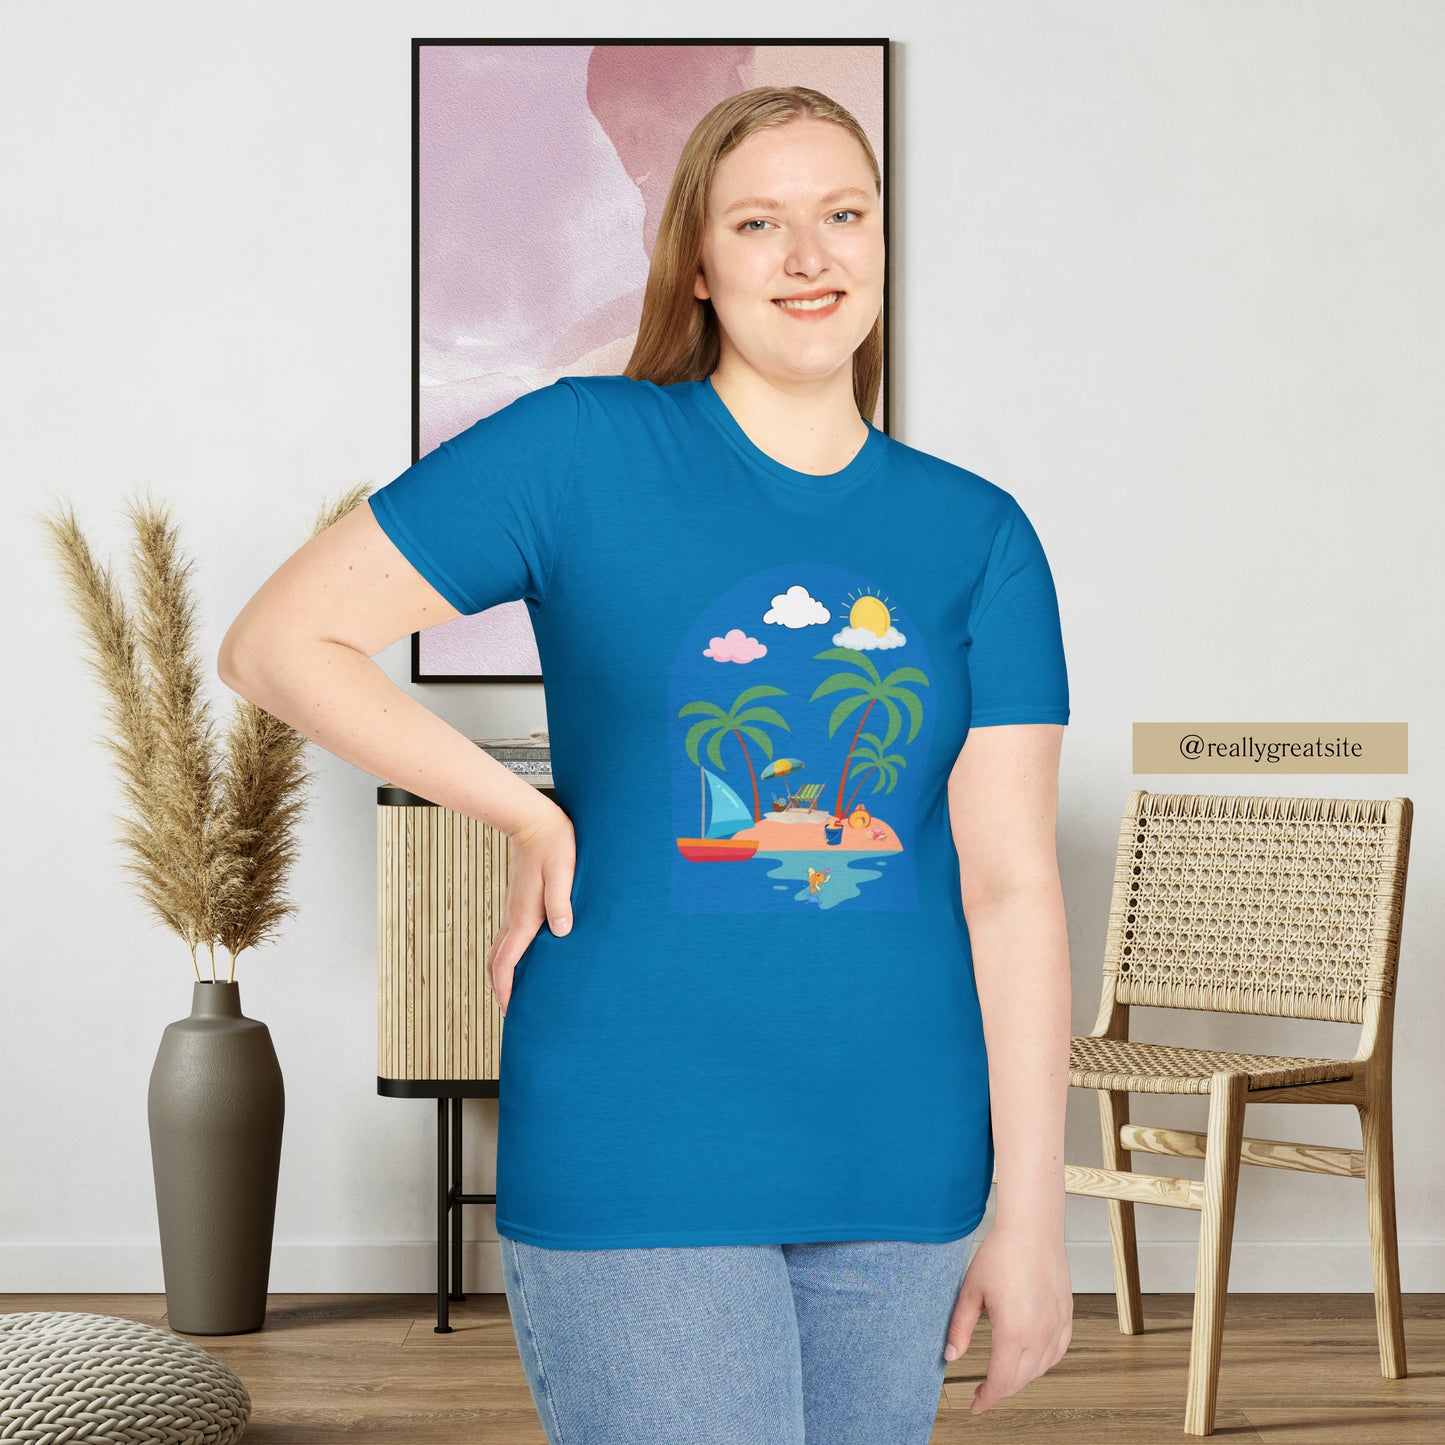 Do you smile when you think of being on an island with the sun, sand and breeze embracing you? This Unisex Softstyle T-Shirt is made for that beach loving person.